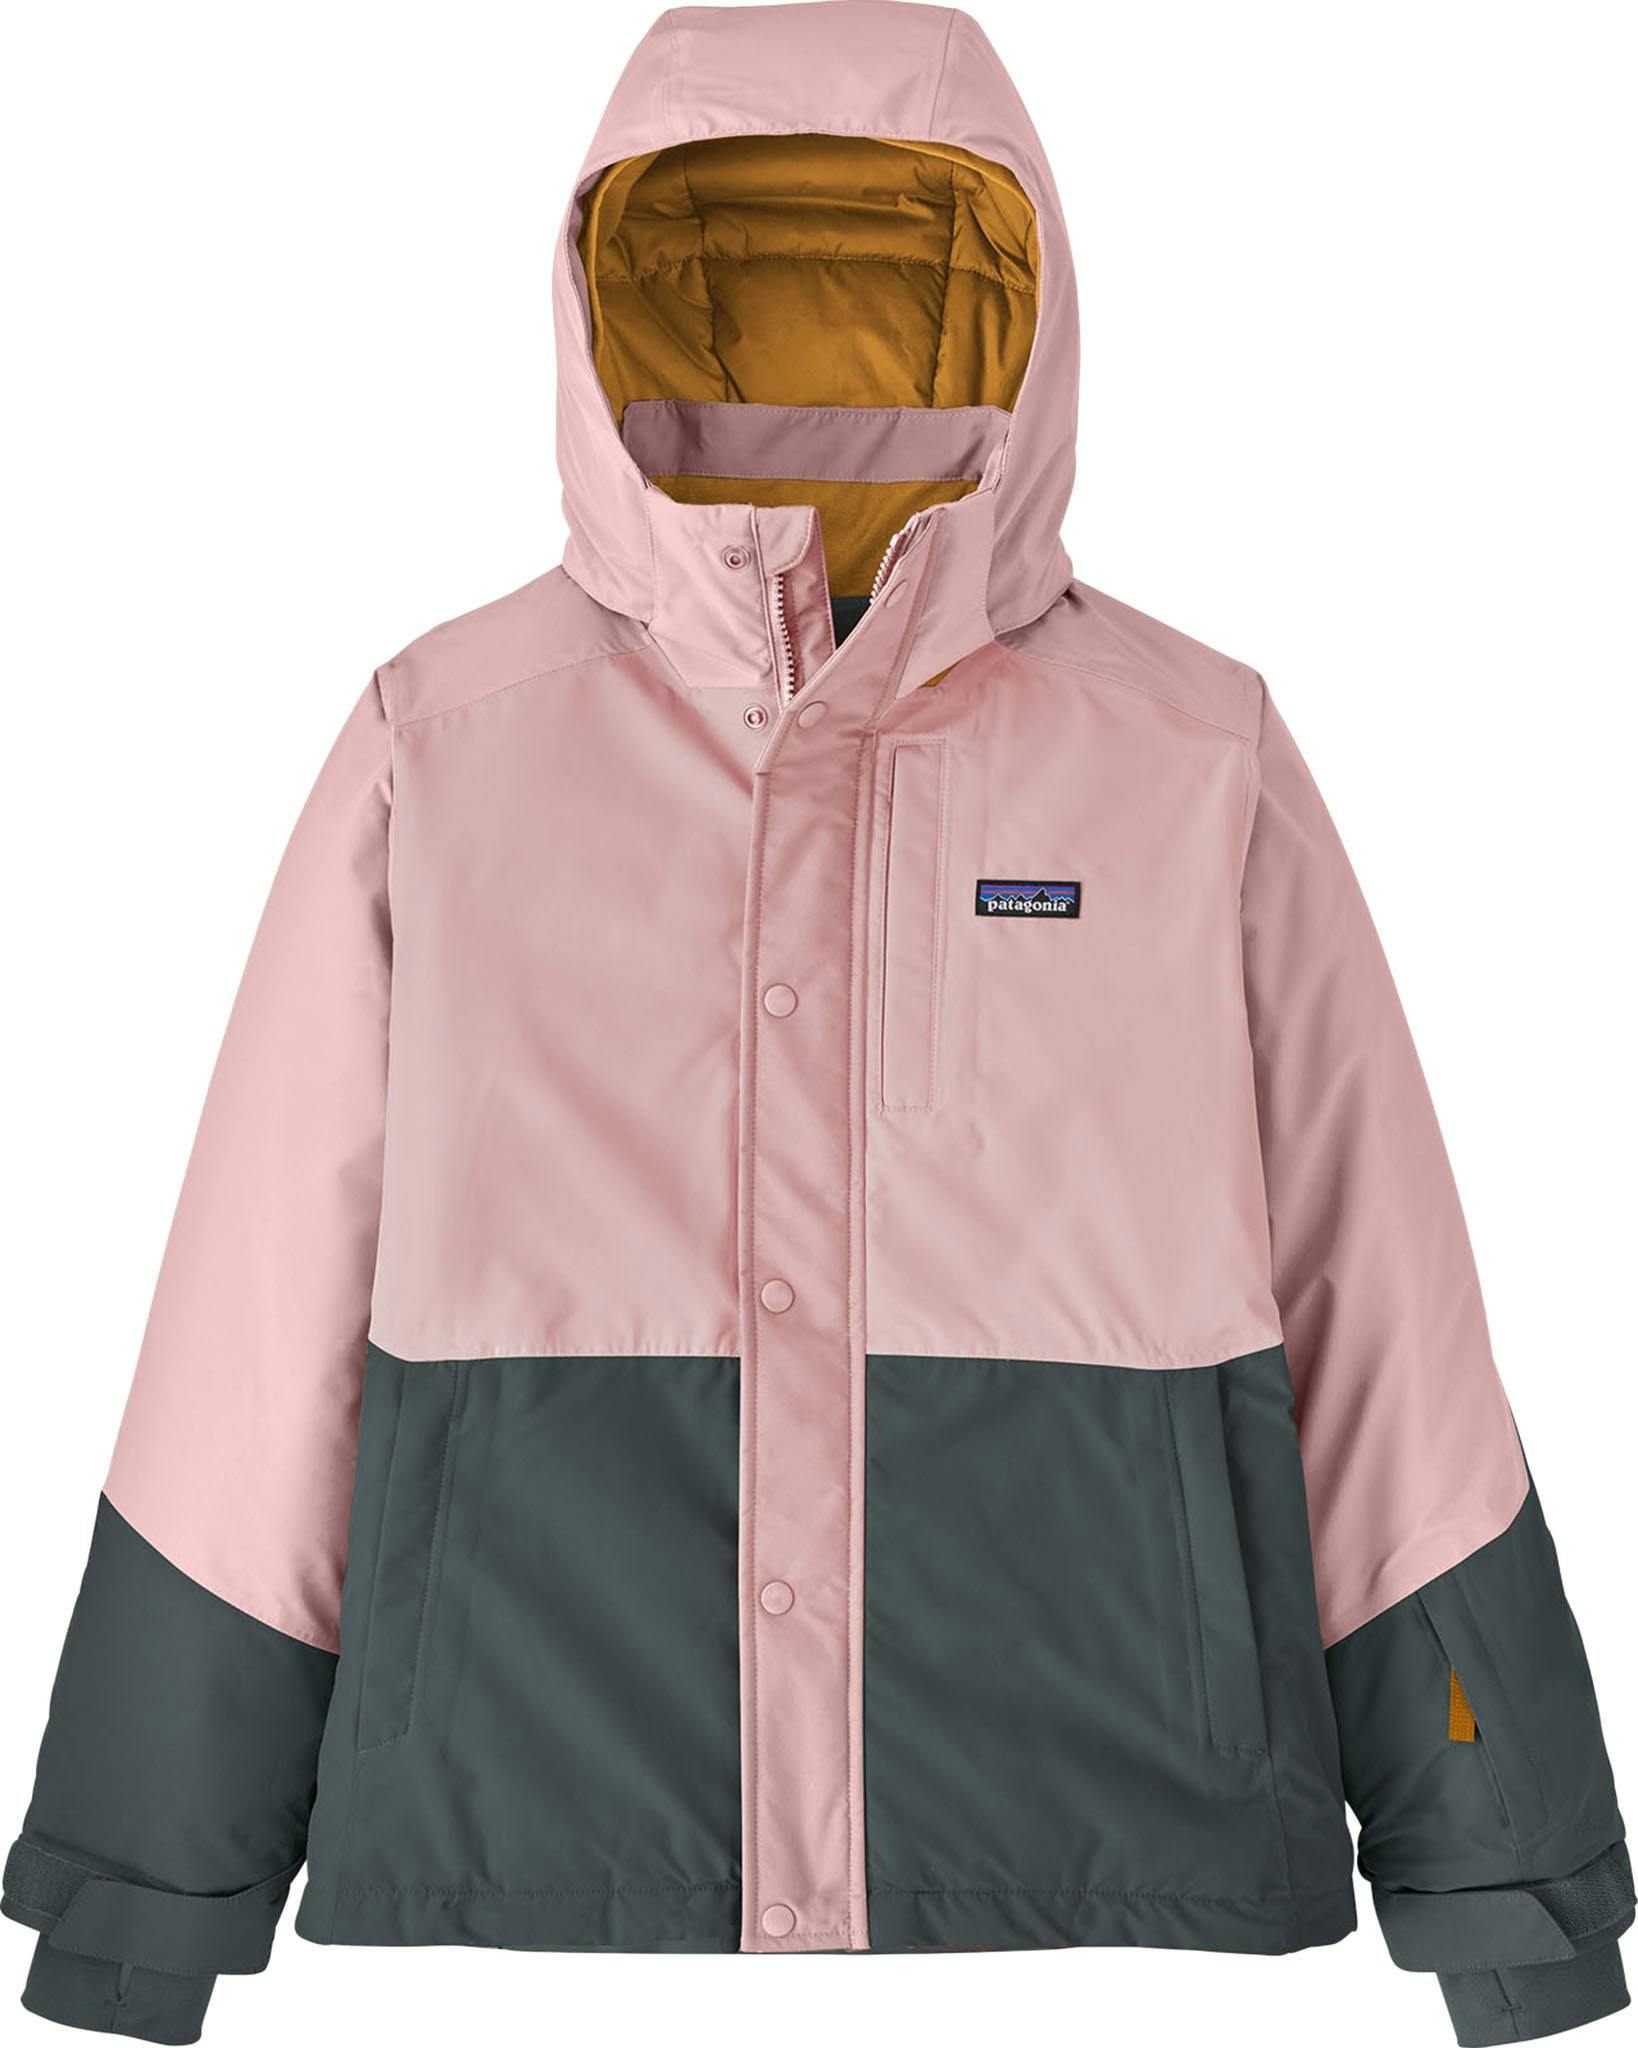 Product image for Powder Town Jacket - Kids